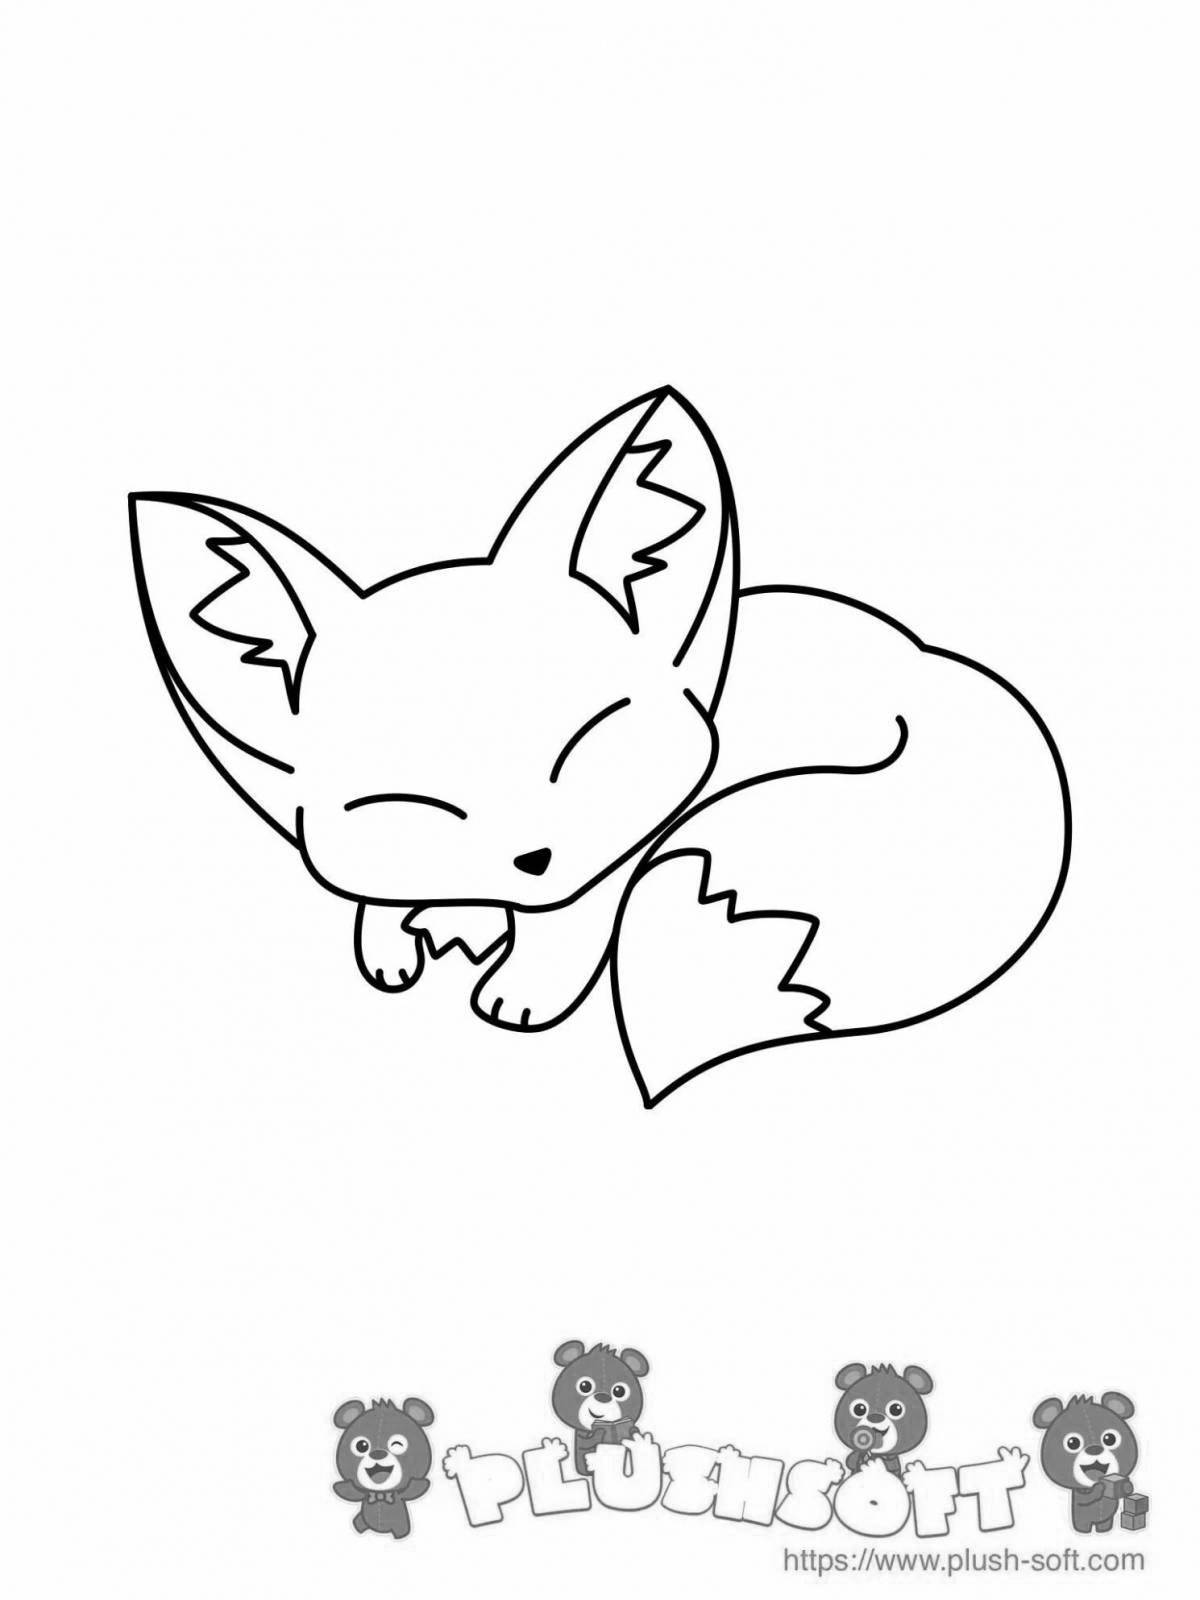 Busy coloring fox